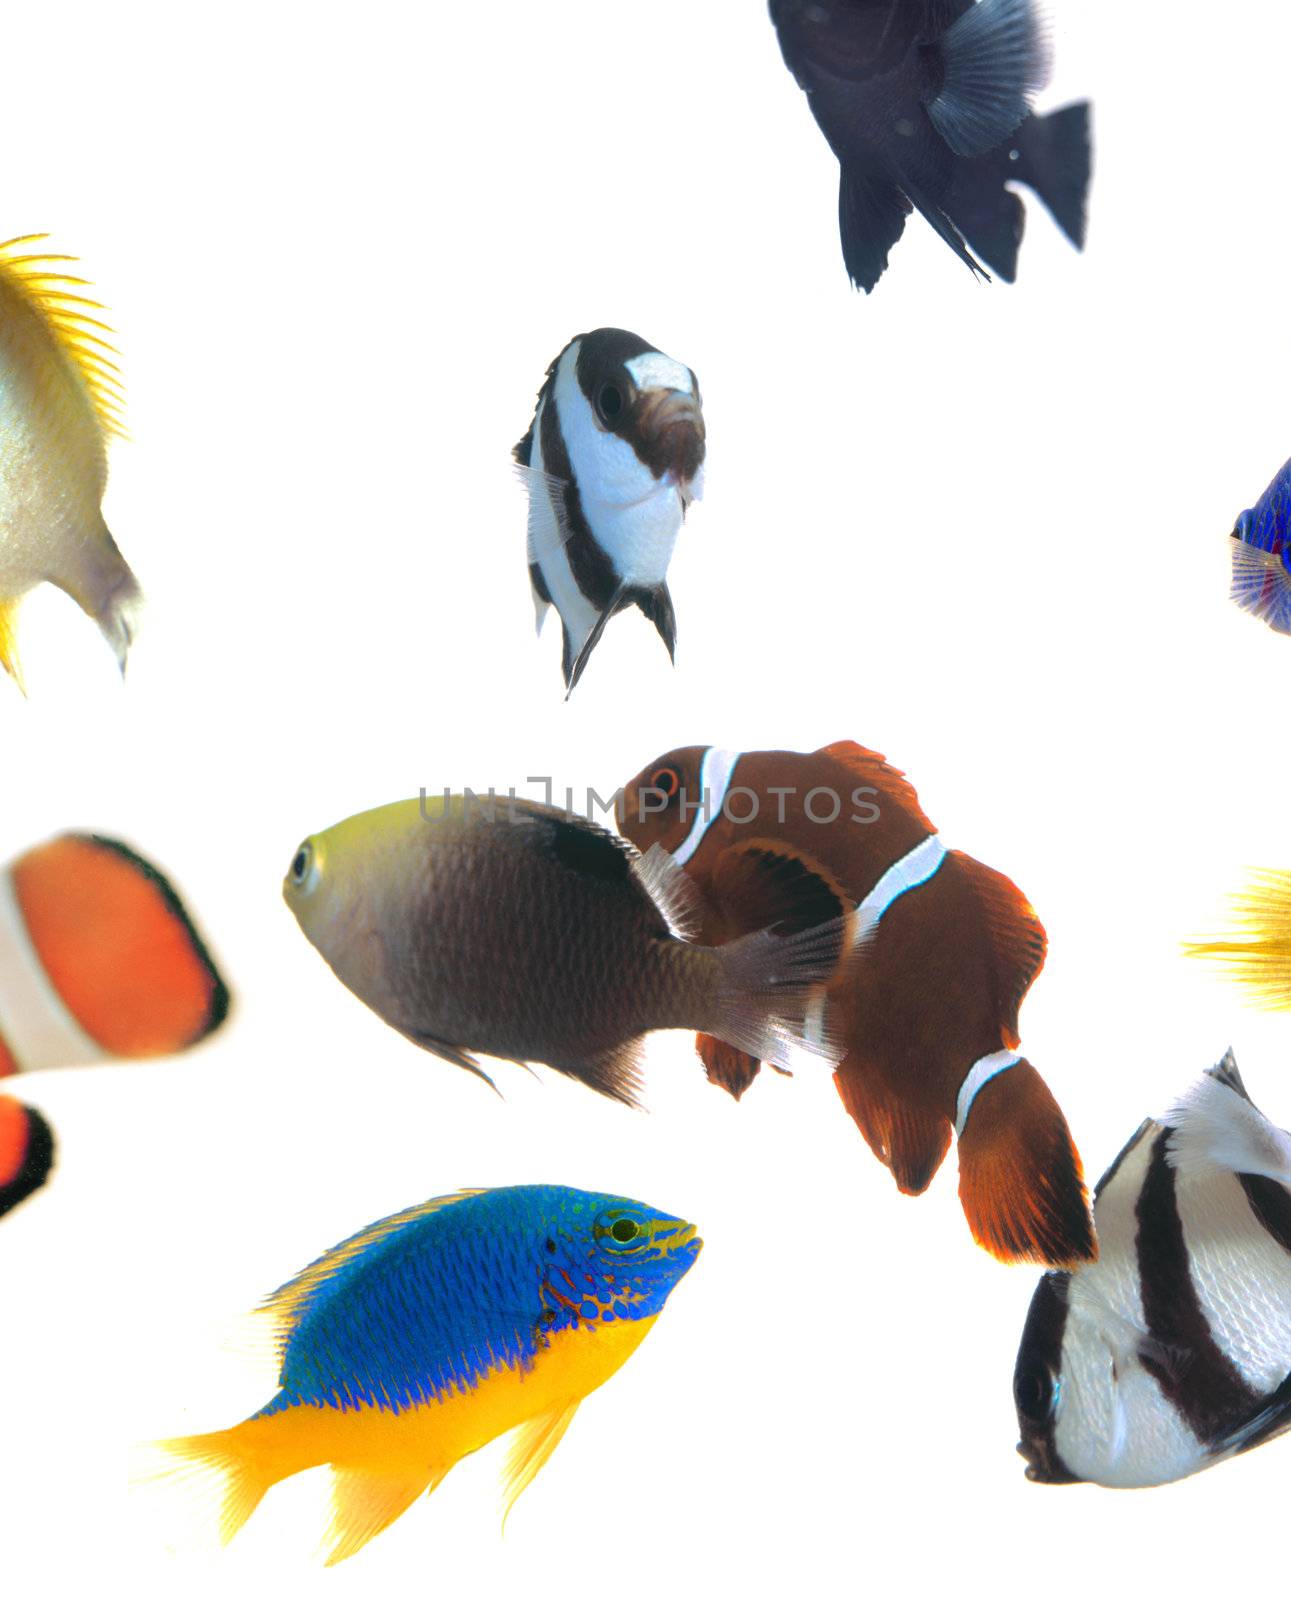 Variety of colorful damselfish on white background
